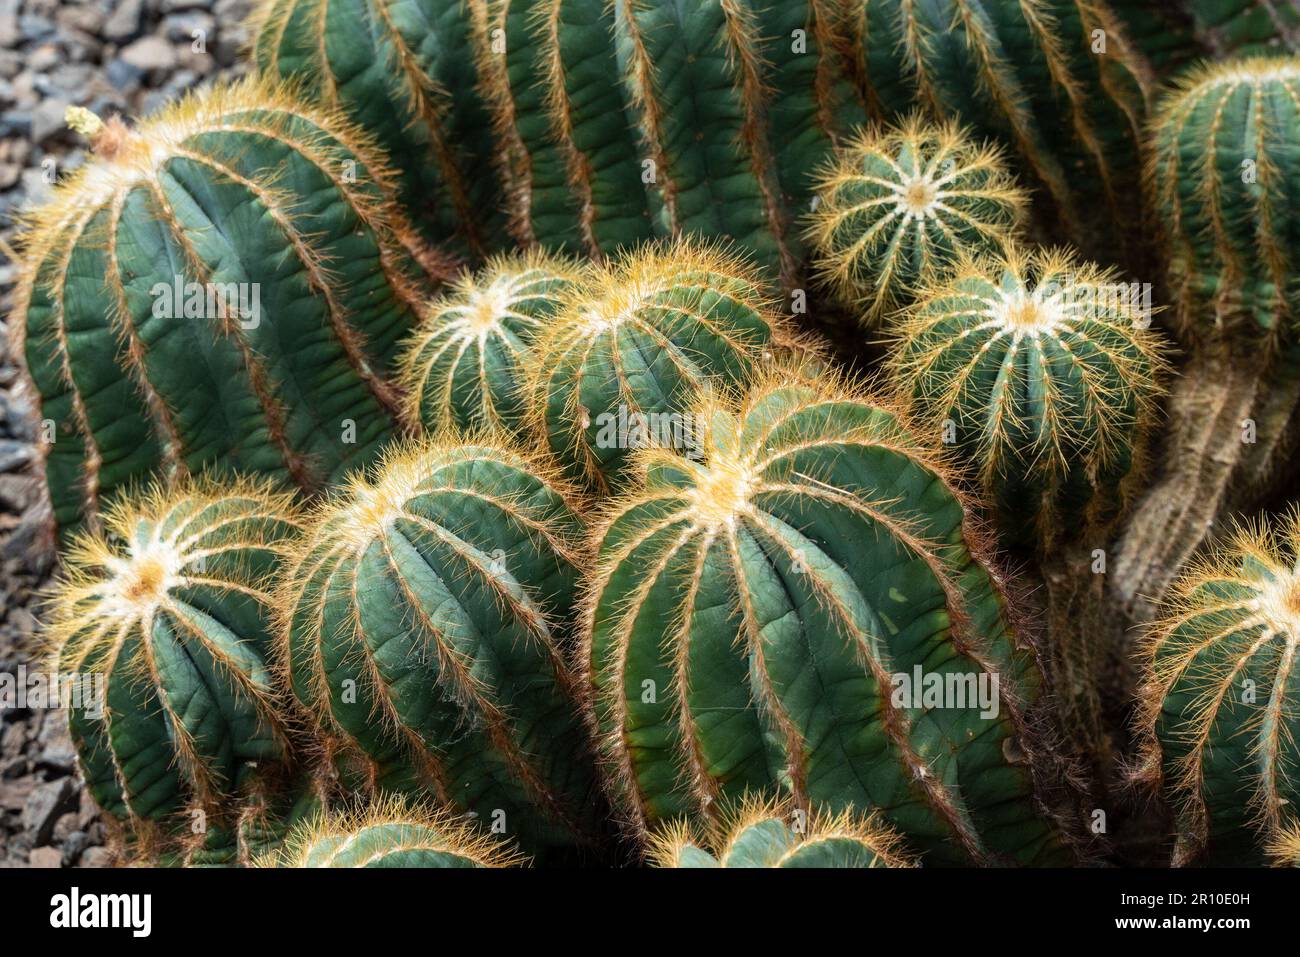 Group of typical Barrel Cactus Cacti Stock Photo